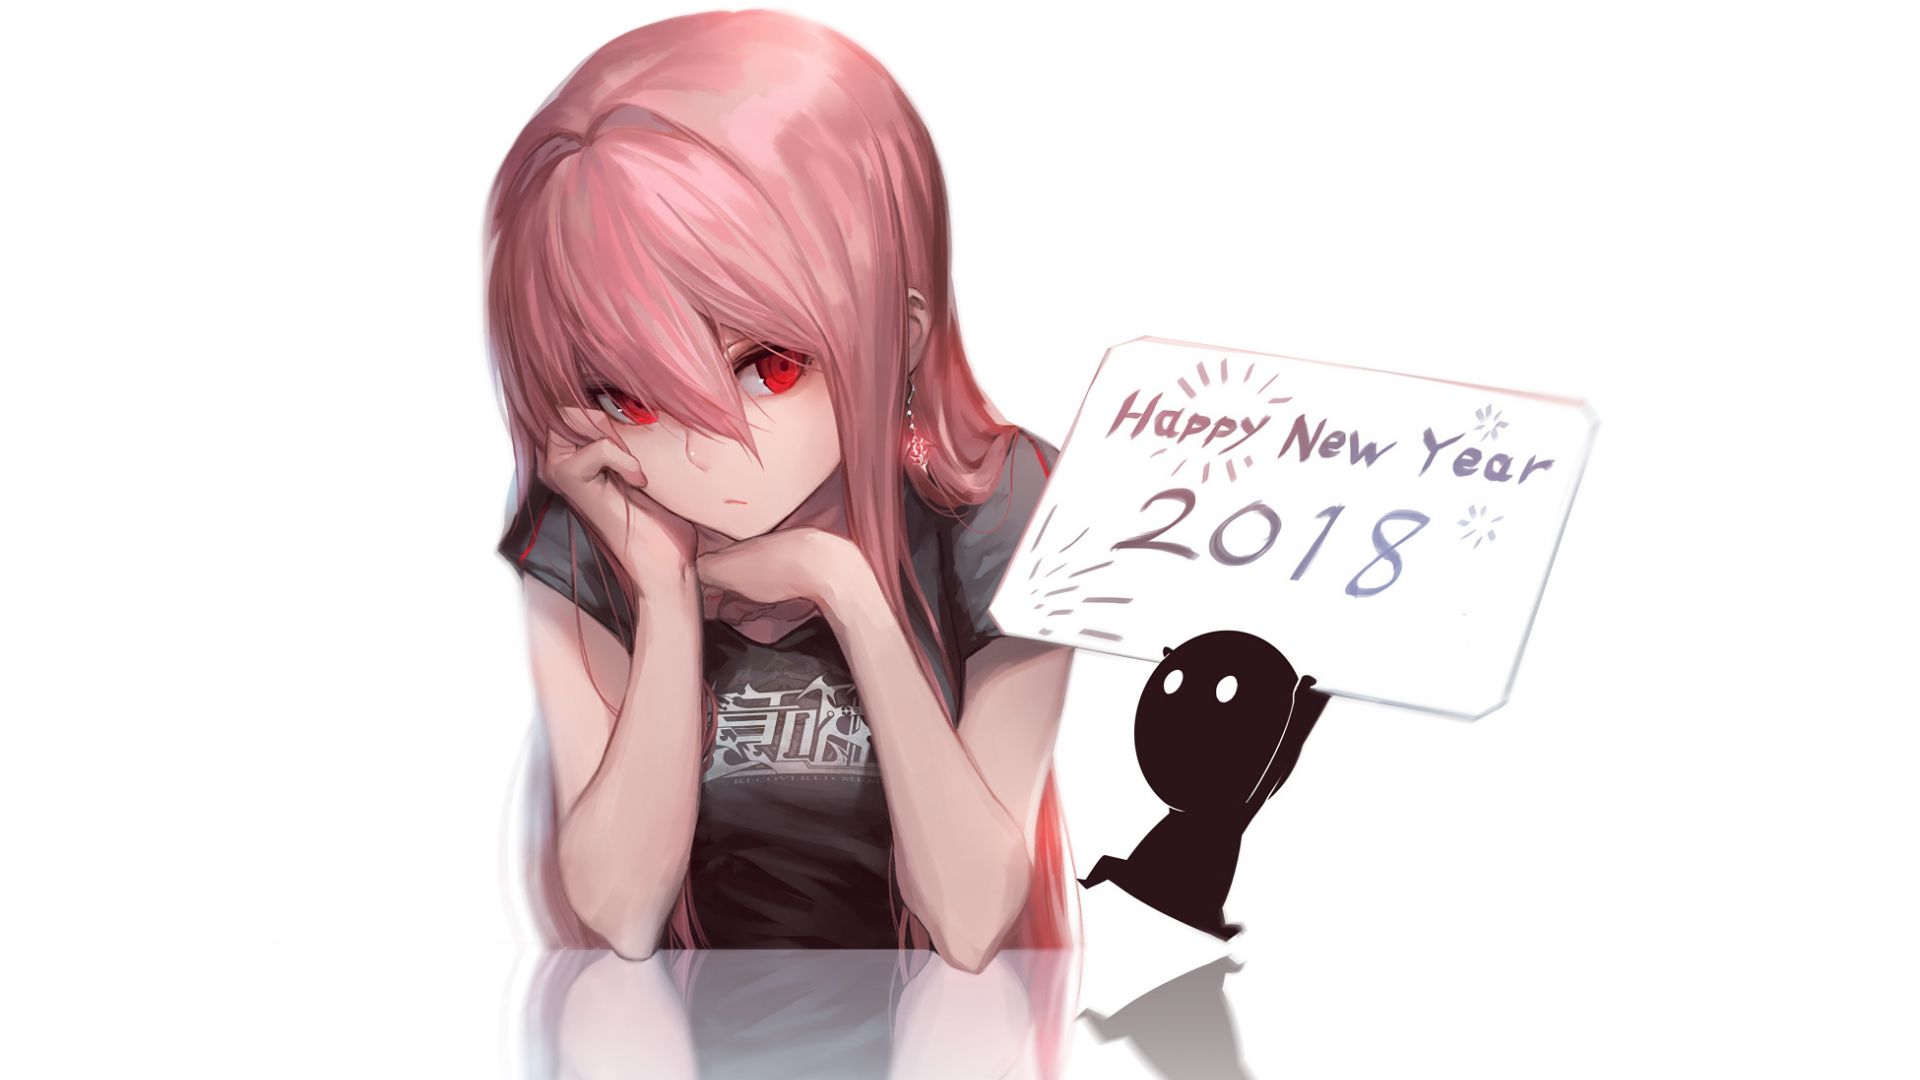 Desktop Wallpaper Red Eyes, Anime Girl, Sad, Happy New Year, 2018, Hd  Image, Picture, Background, 0f032b